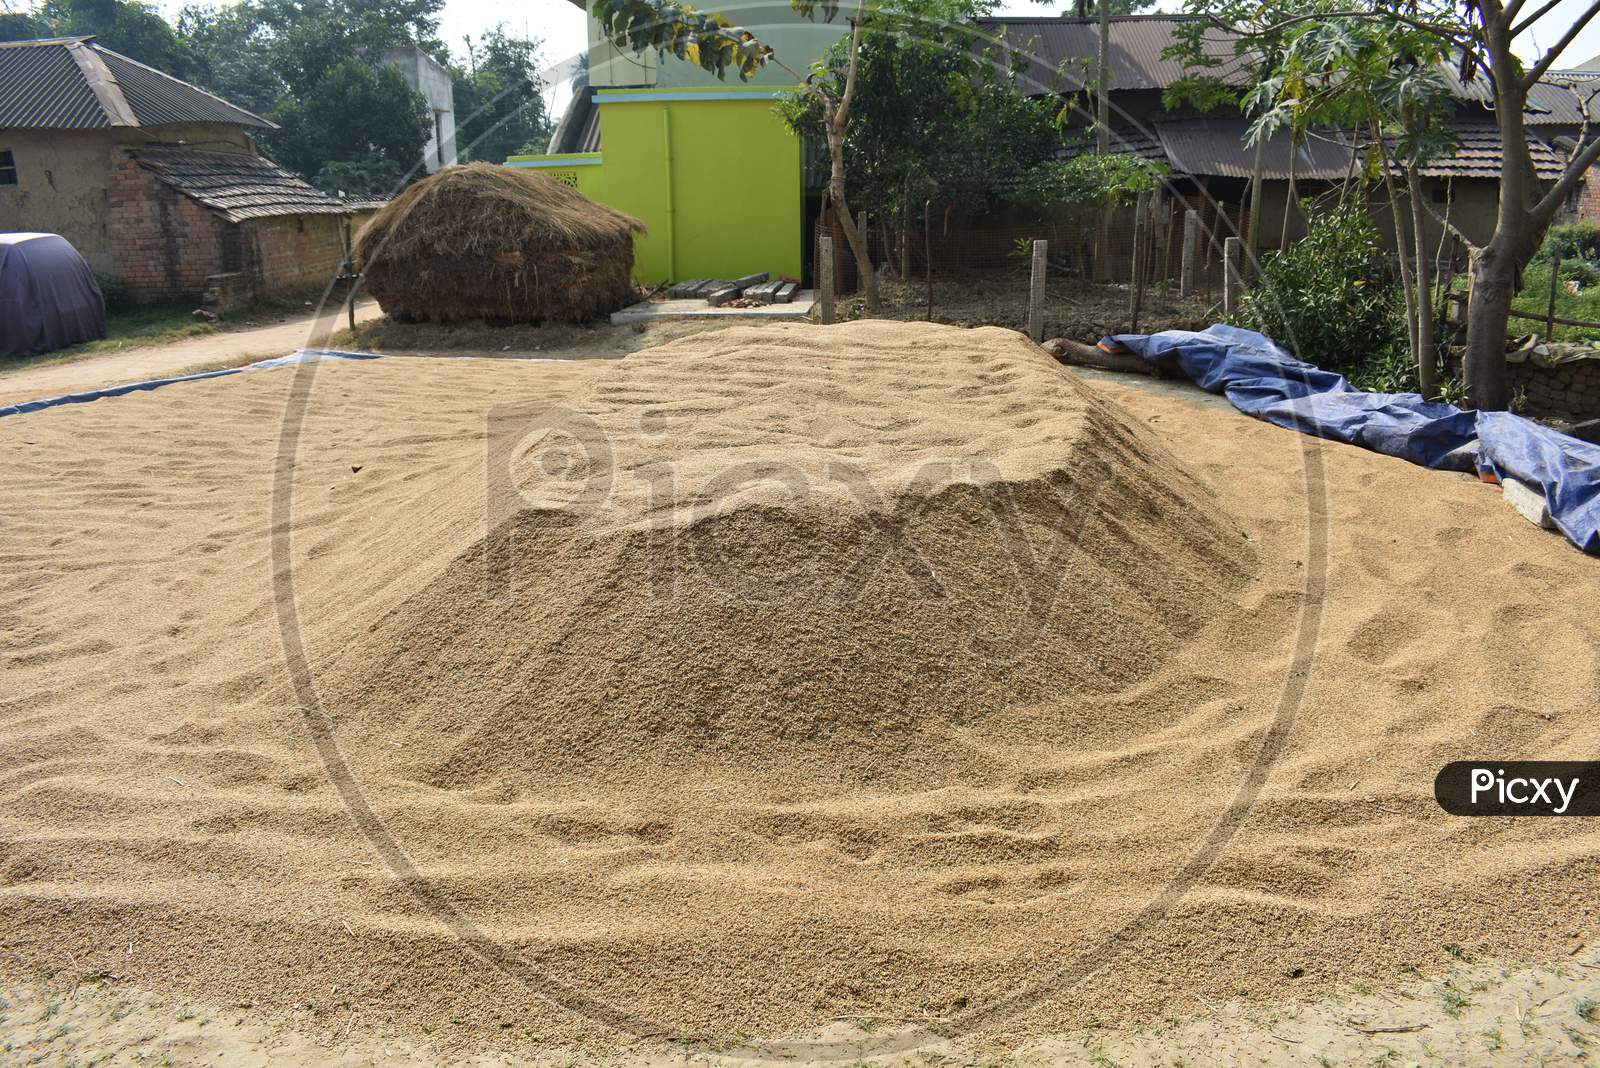 Stock Of Rice Grain Spread In The Ground To Dry Under The Sun